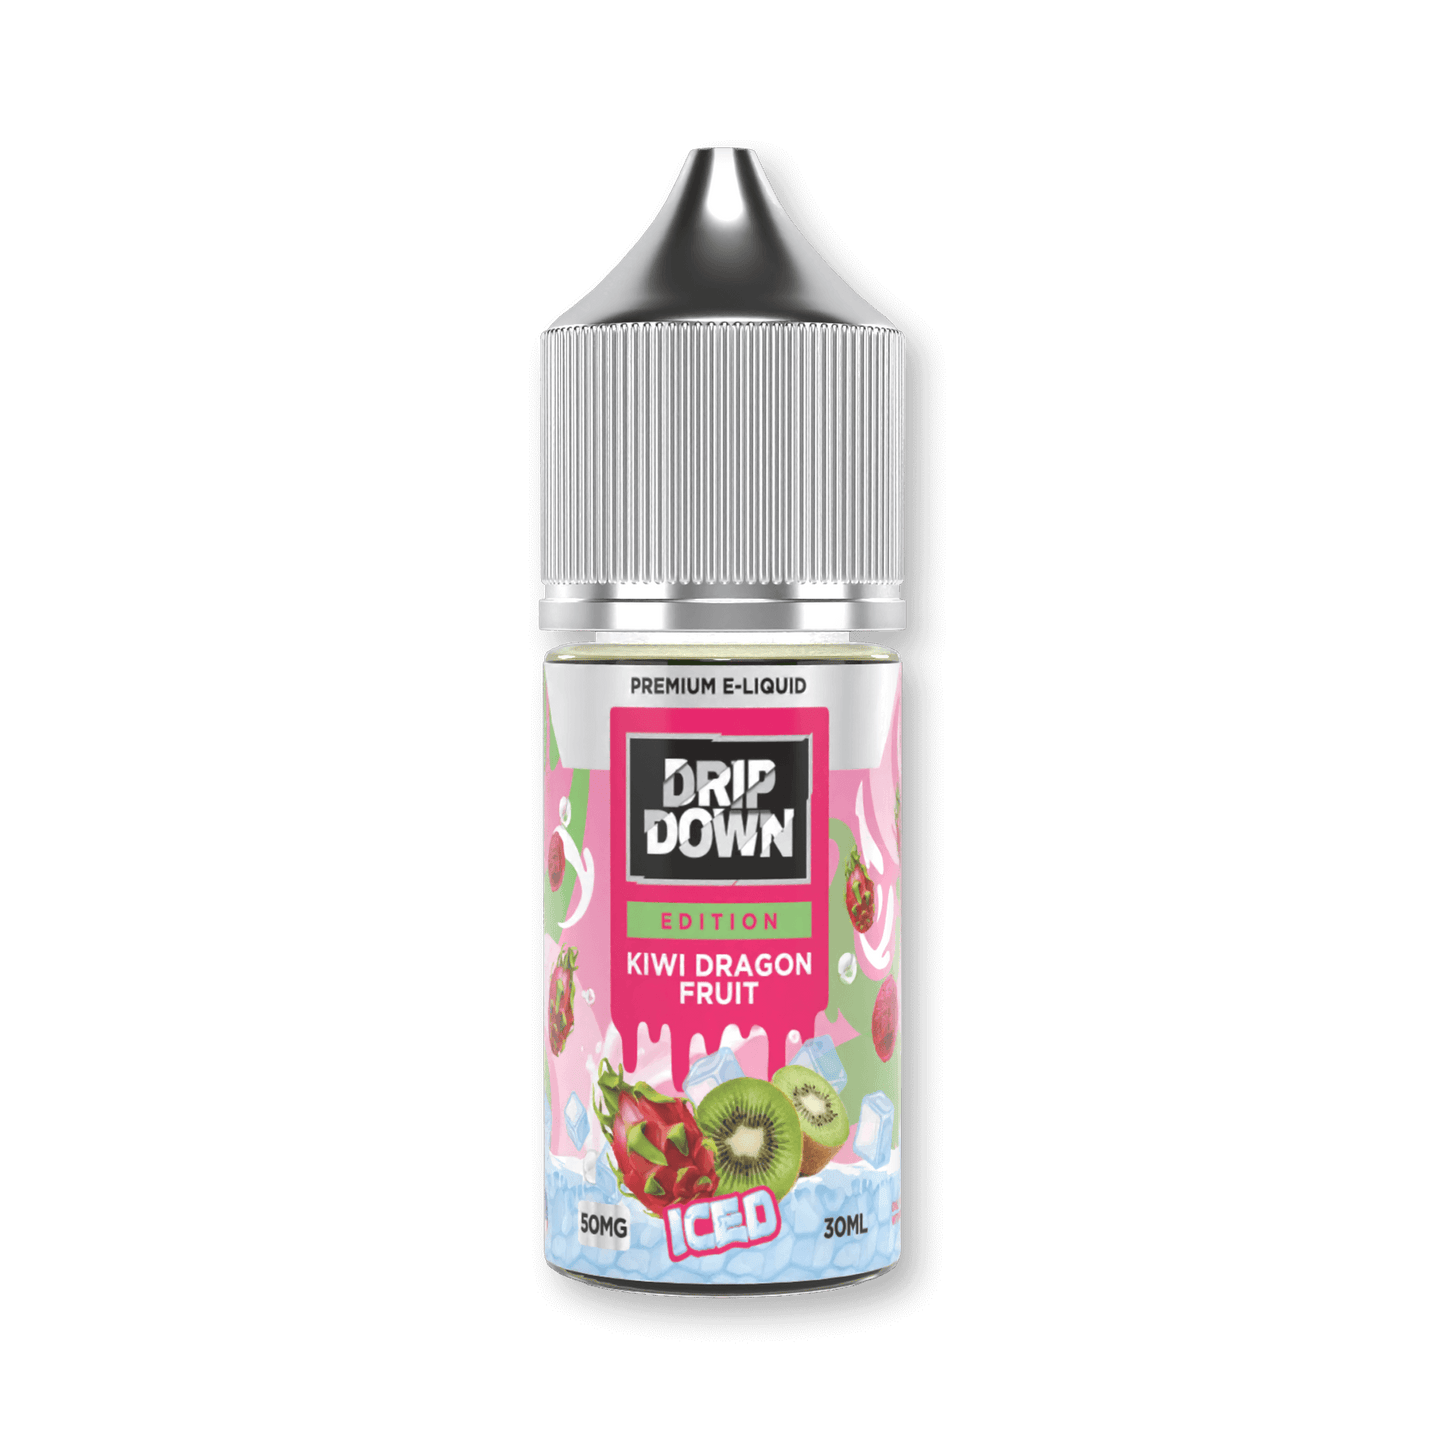 Kiwi Dragon Fruit DRIP DOWN Edition Series 30ml bottle Exotic fusion Vaping experience Tropical goodness Ripe kiwi Luscious dragon fruit Meticulously crafted Flavor: Kiwi, Dragon Fruit, Ice Series: Edition Nicotine Strength: 25mg, 50mg Child Resistant Cap